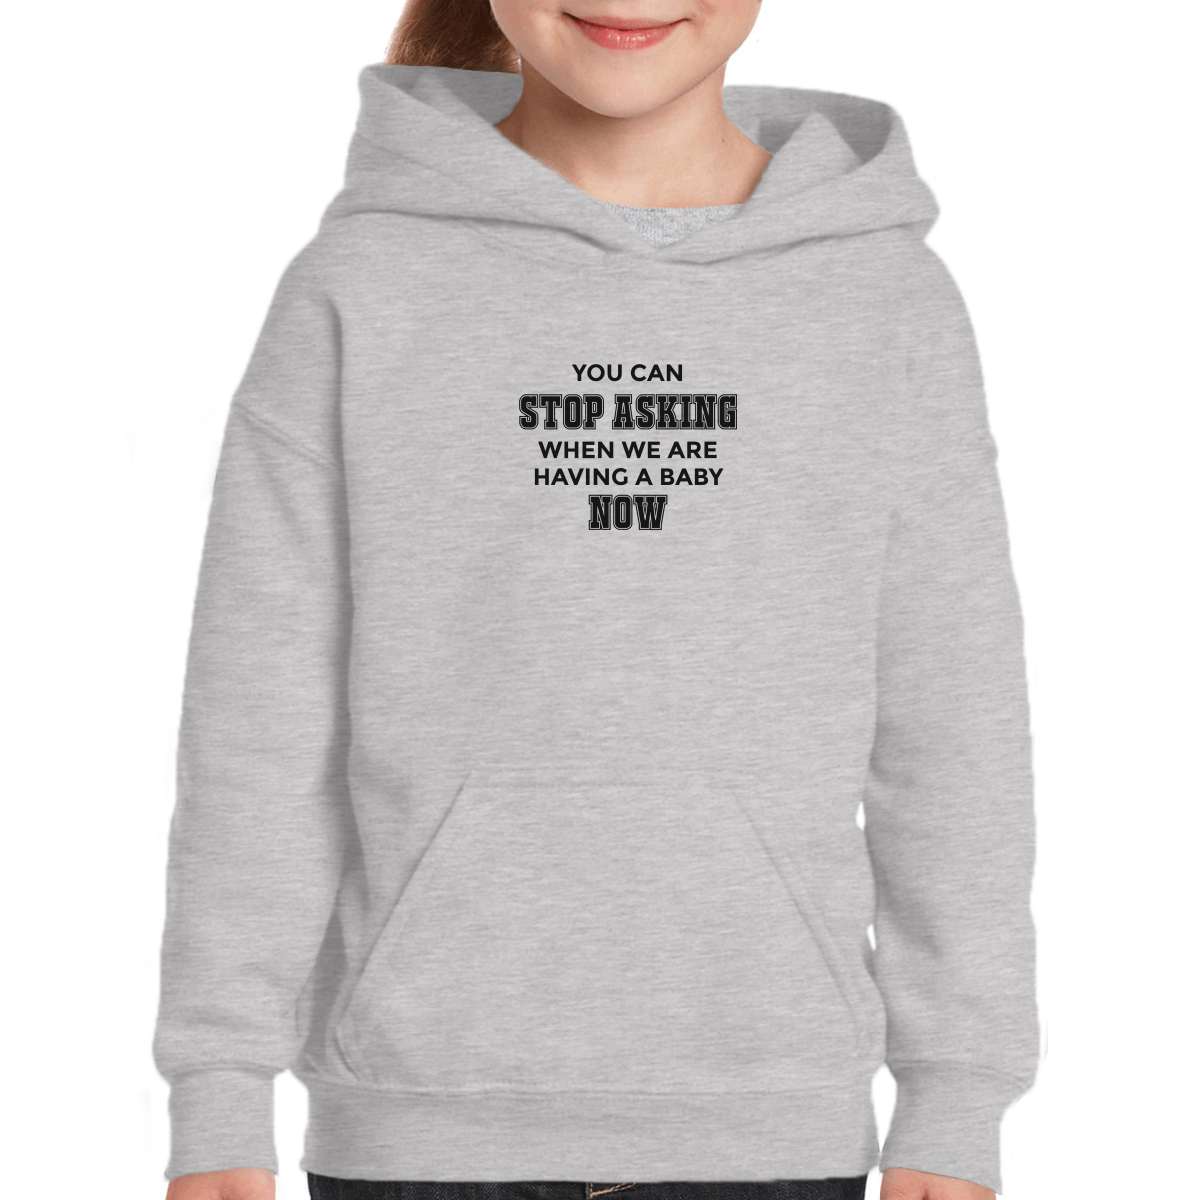 You can stop asking when we are having baby NOW Kids Hoodie | Gray